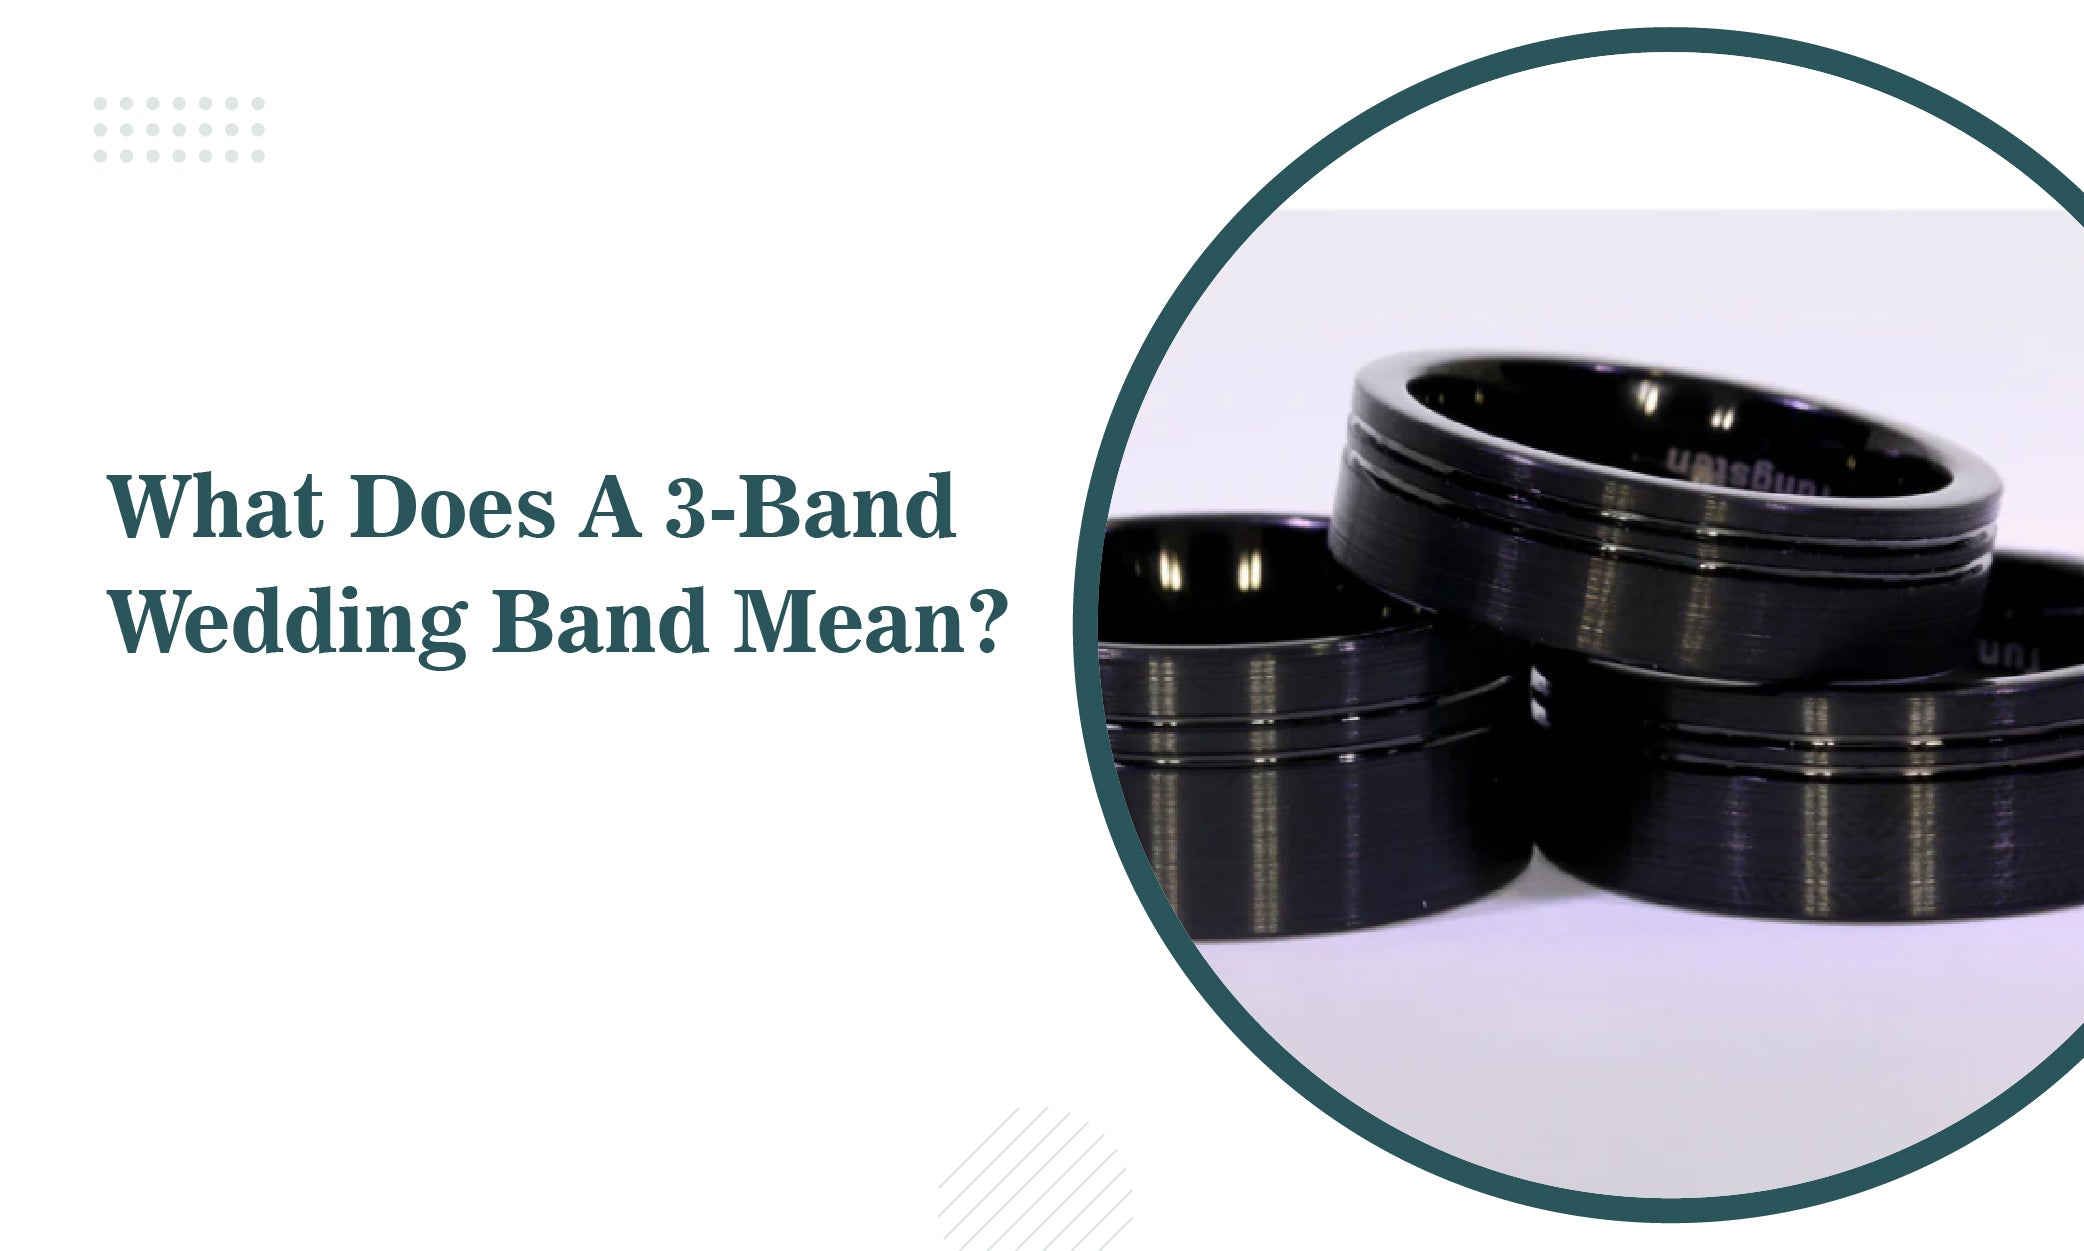 What Does A 3-Band Wedding Band Mean